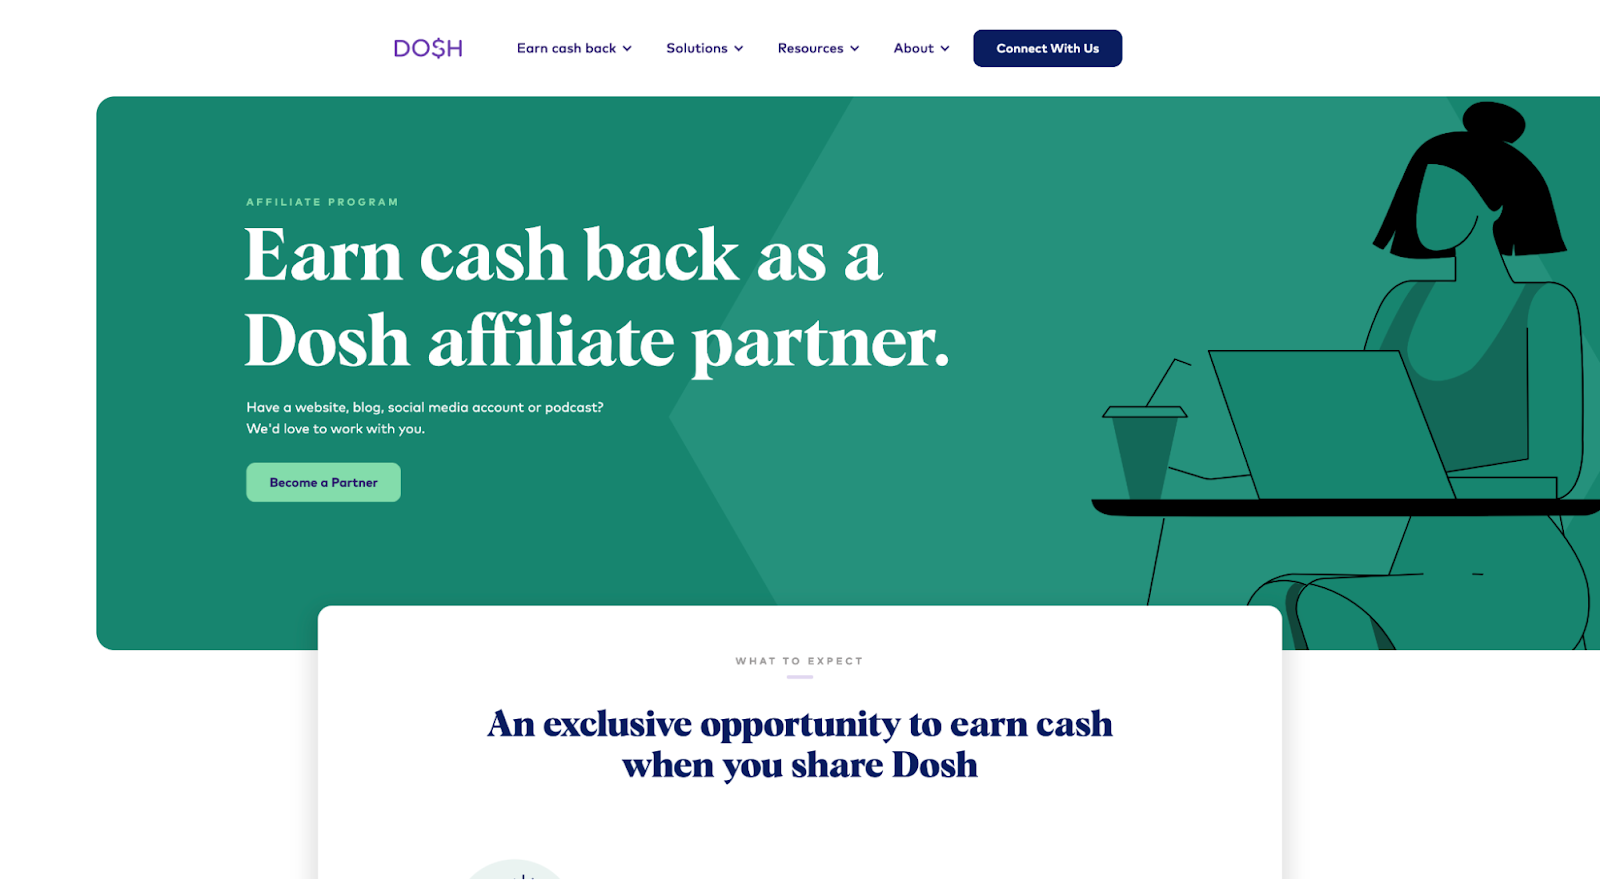 Example of referral program from Dosh